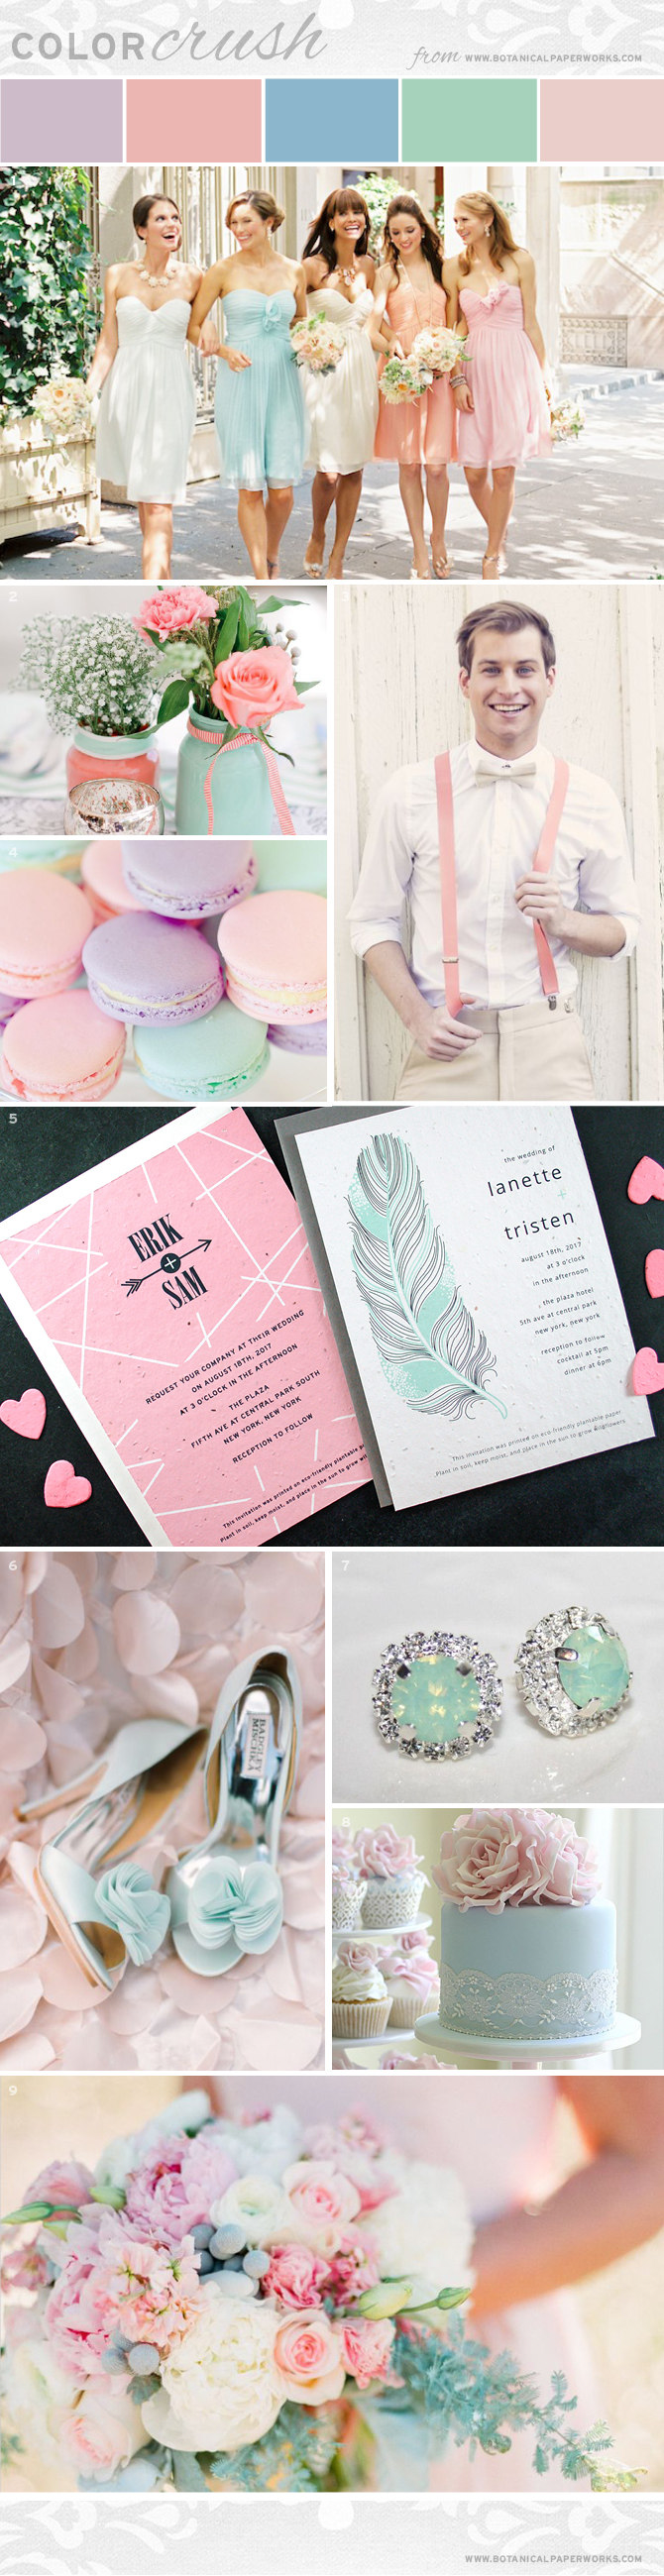 Get inspired for the lovely upcoming Spring and Summer Wedding season with the delicate and romantic Mixed Pastels featured in the latest Color Crush Inspiration Board.